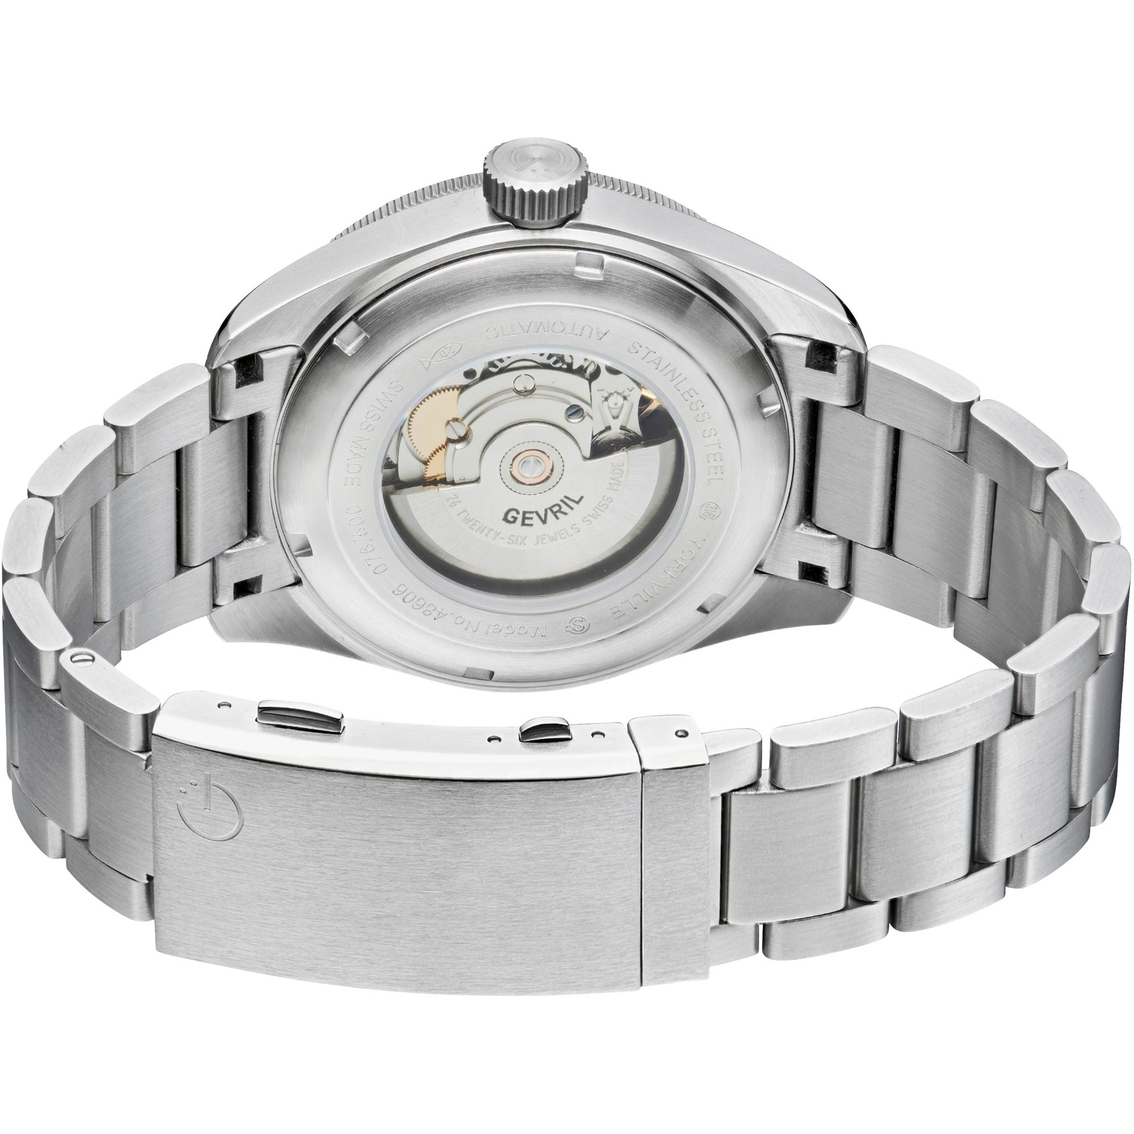 Gevril Men's Yorkville Automatic Swiss Movement Watch - Image 2 of 3